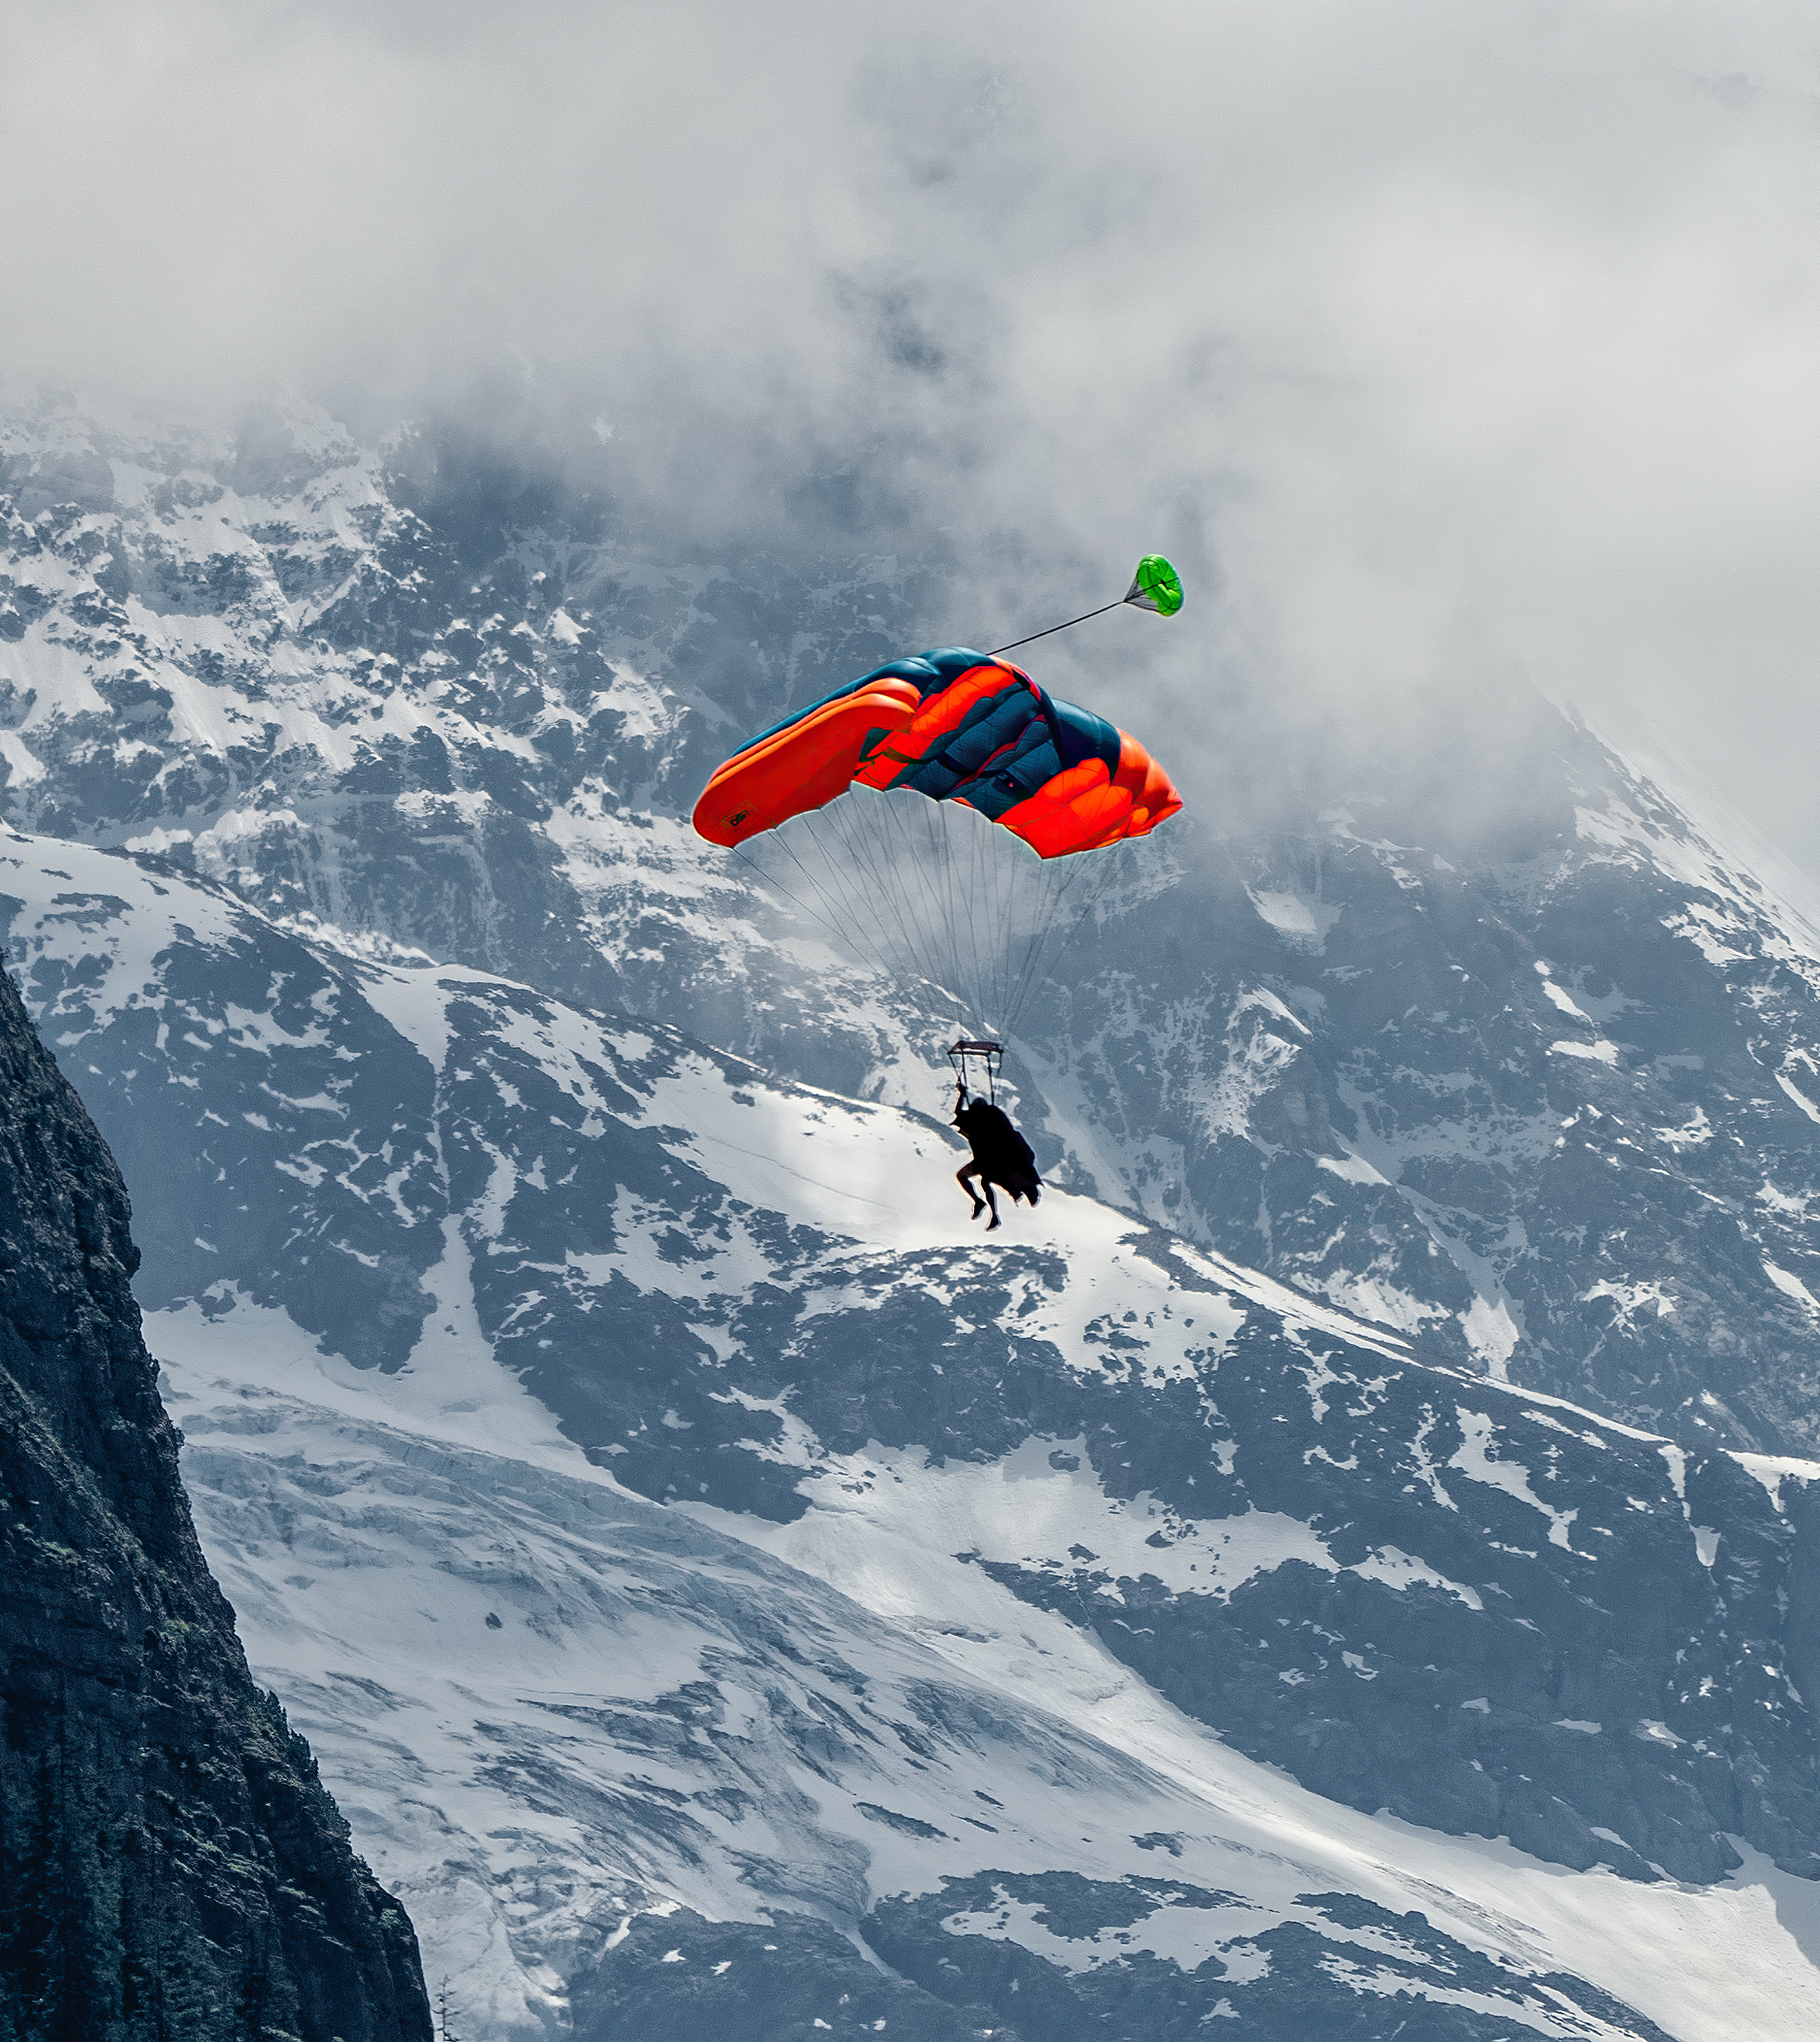 parachute, paragliding, sports, mountains, snow, snow covered, snowbound, paraglider